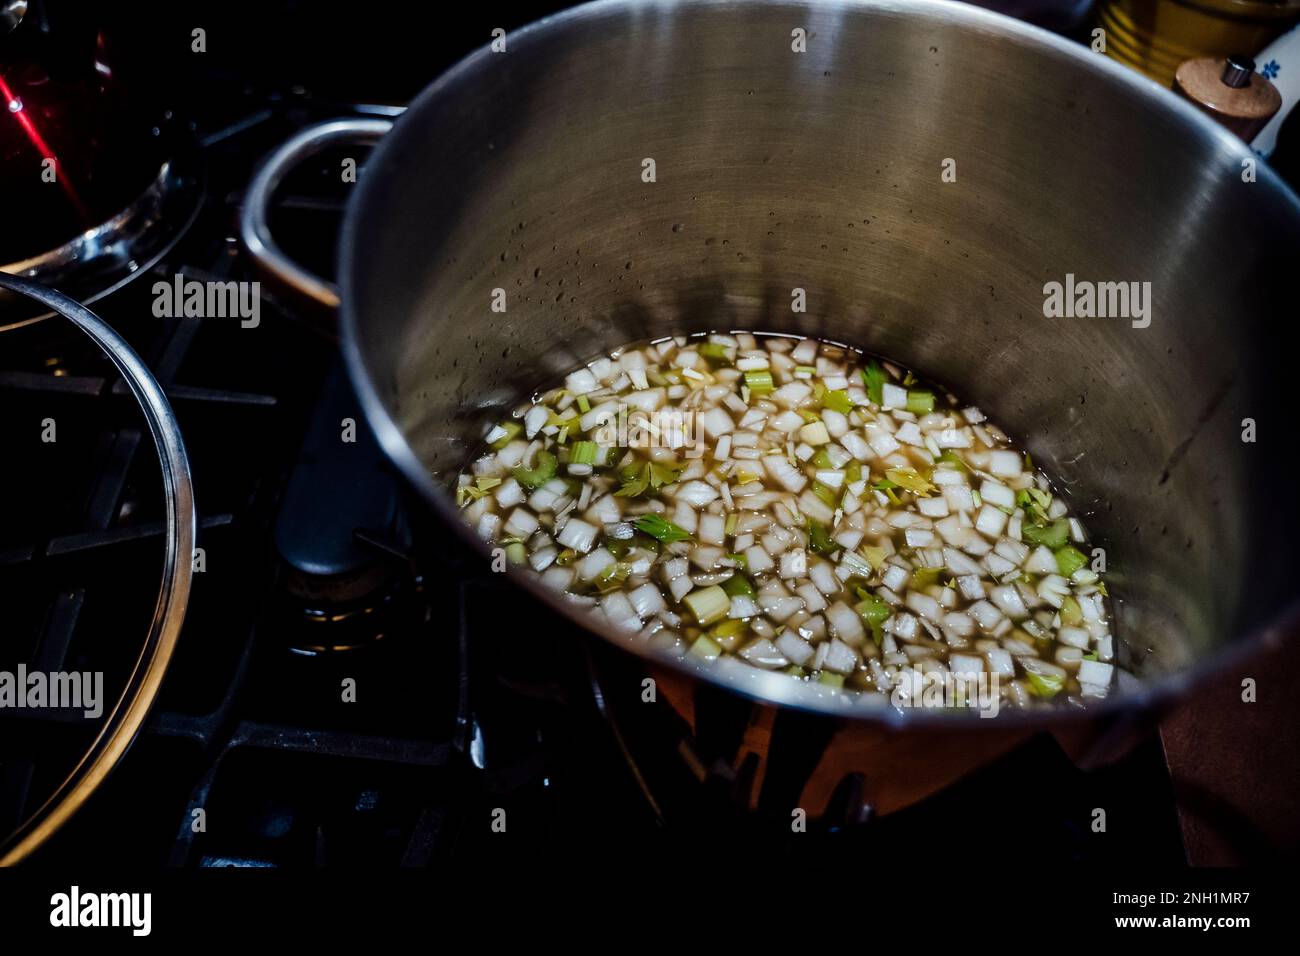 https://c8.alamy.com/comp/2NH1MR7/view-from-above-of-large-soup-pot-warming-onions-celery-and-broth-2NH1MR7.jpg